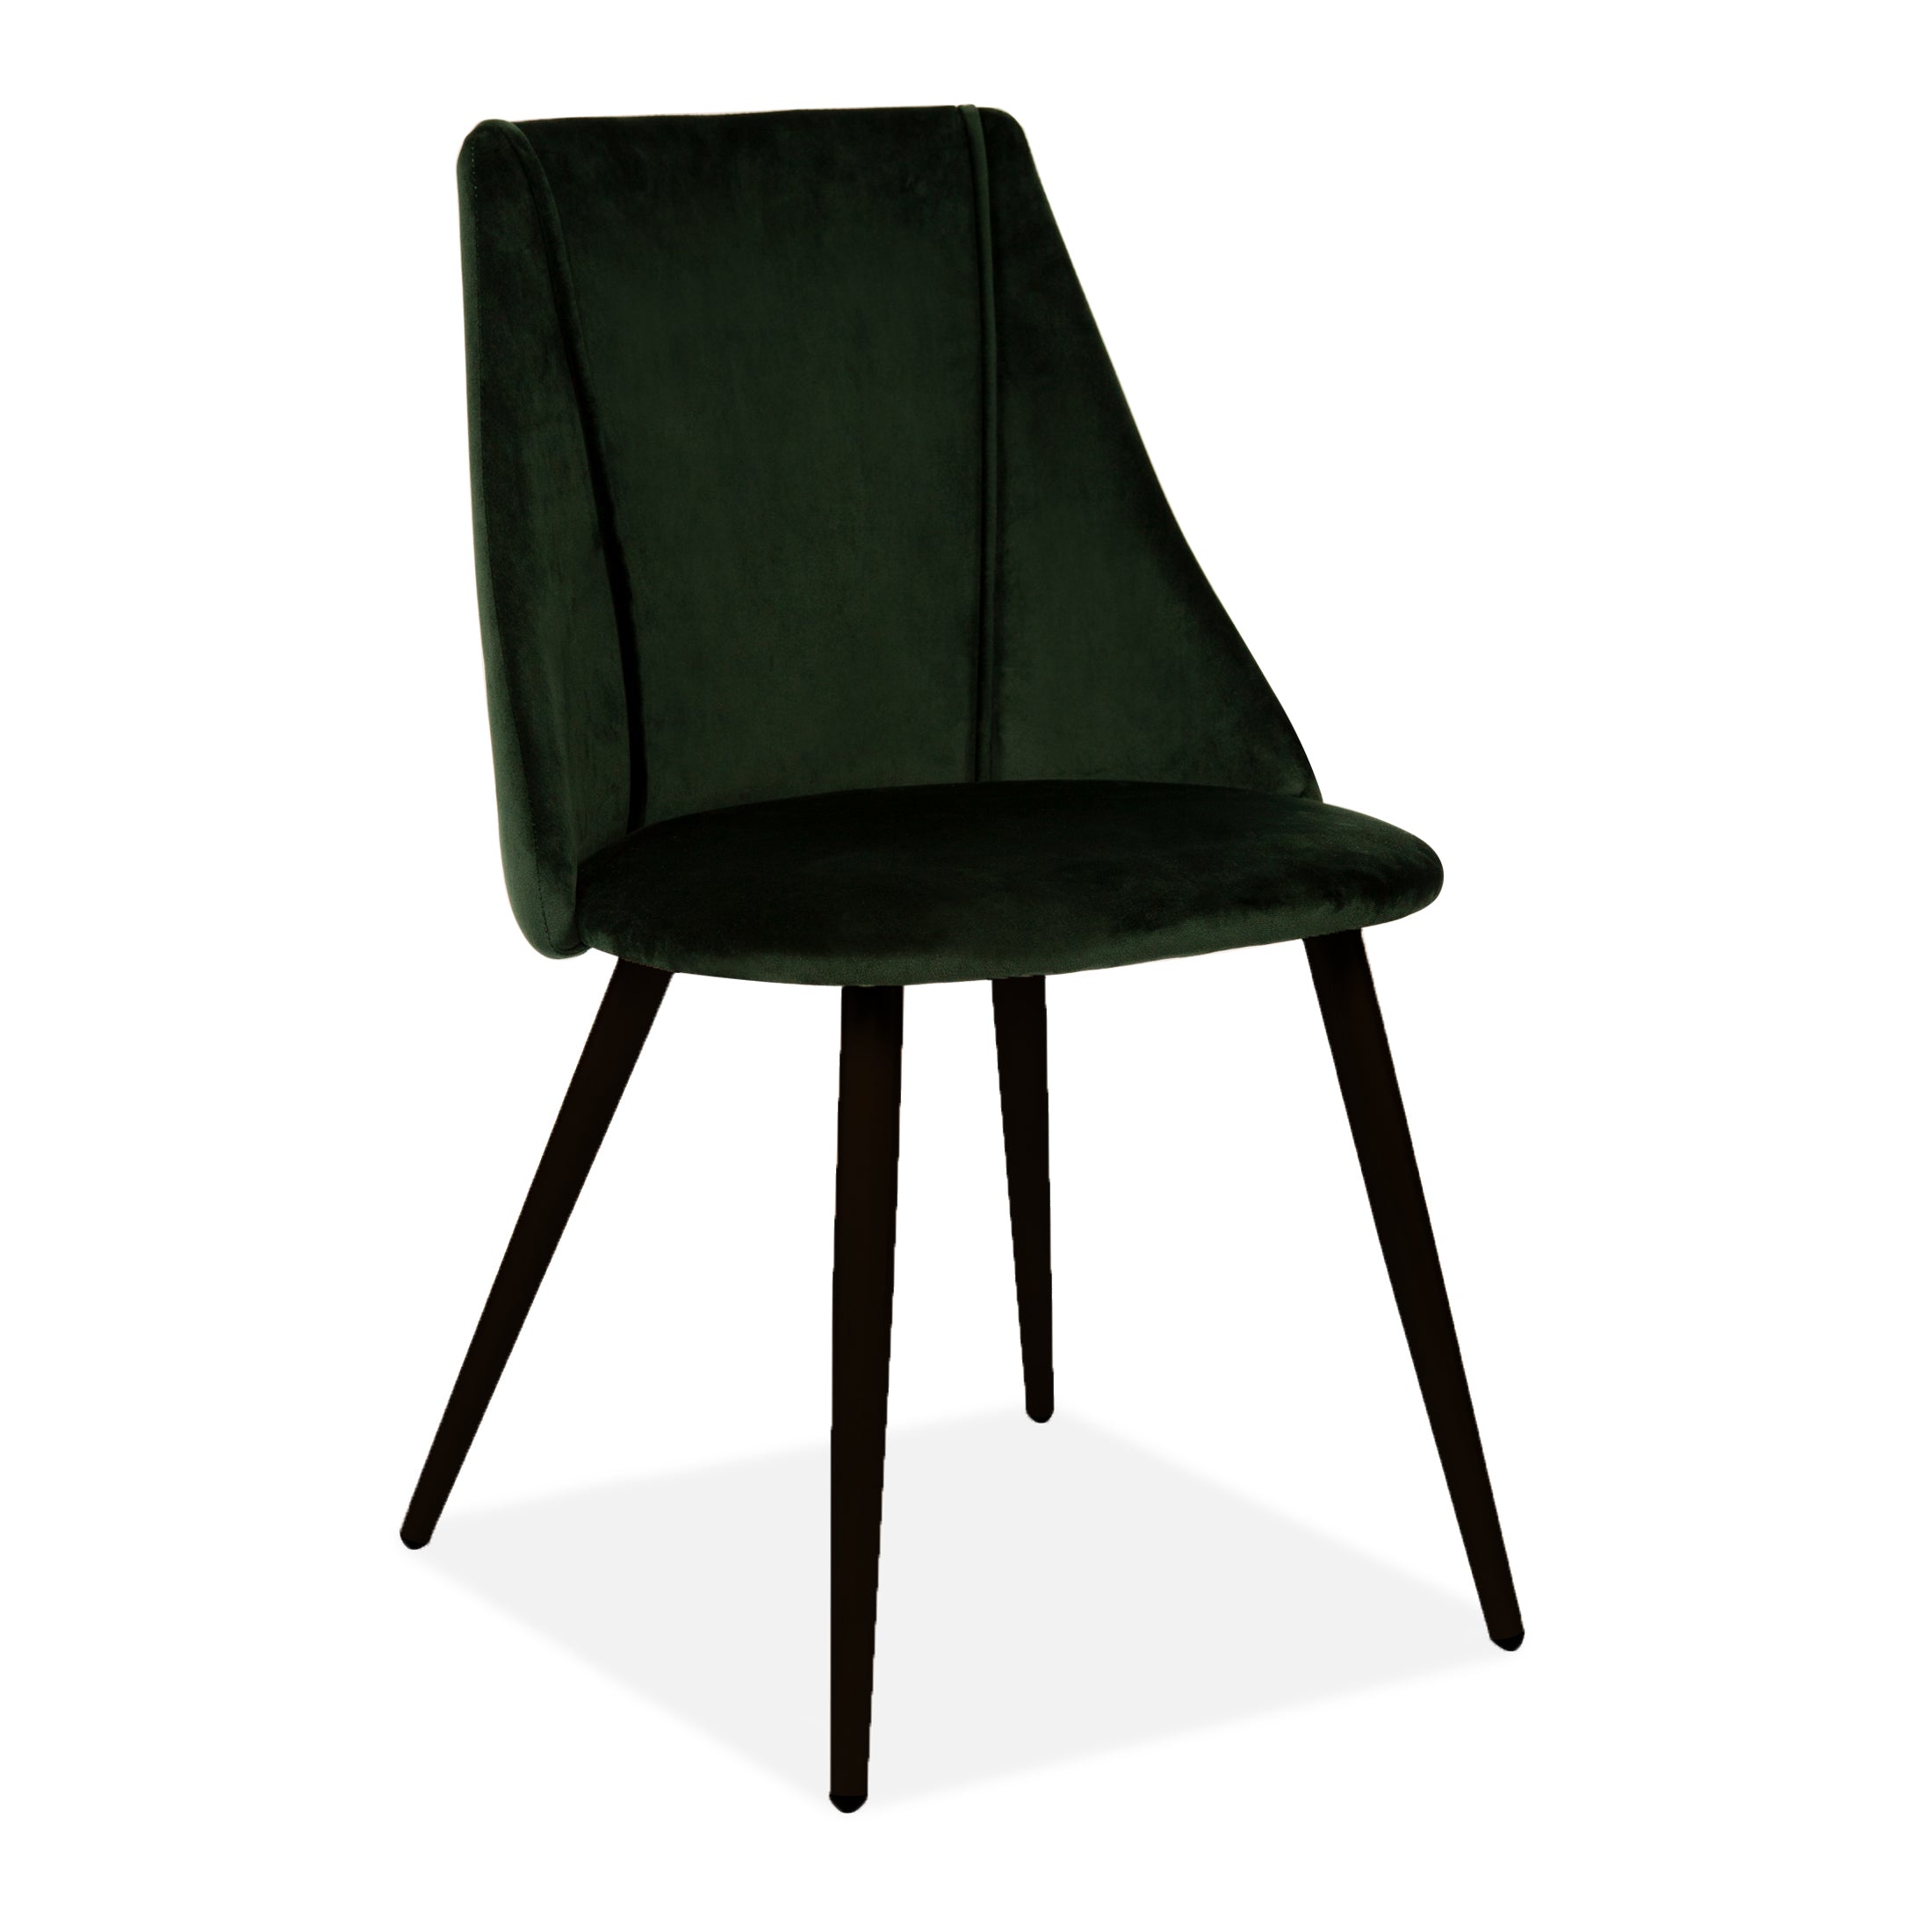 Black Ferrier Dining Chairs (2 Pack)